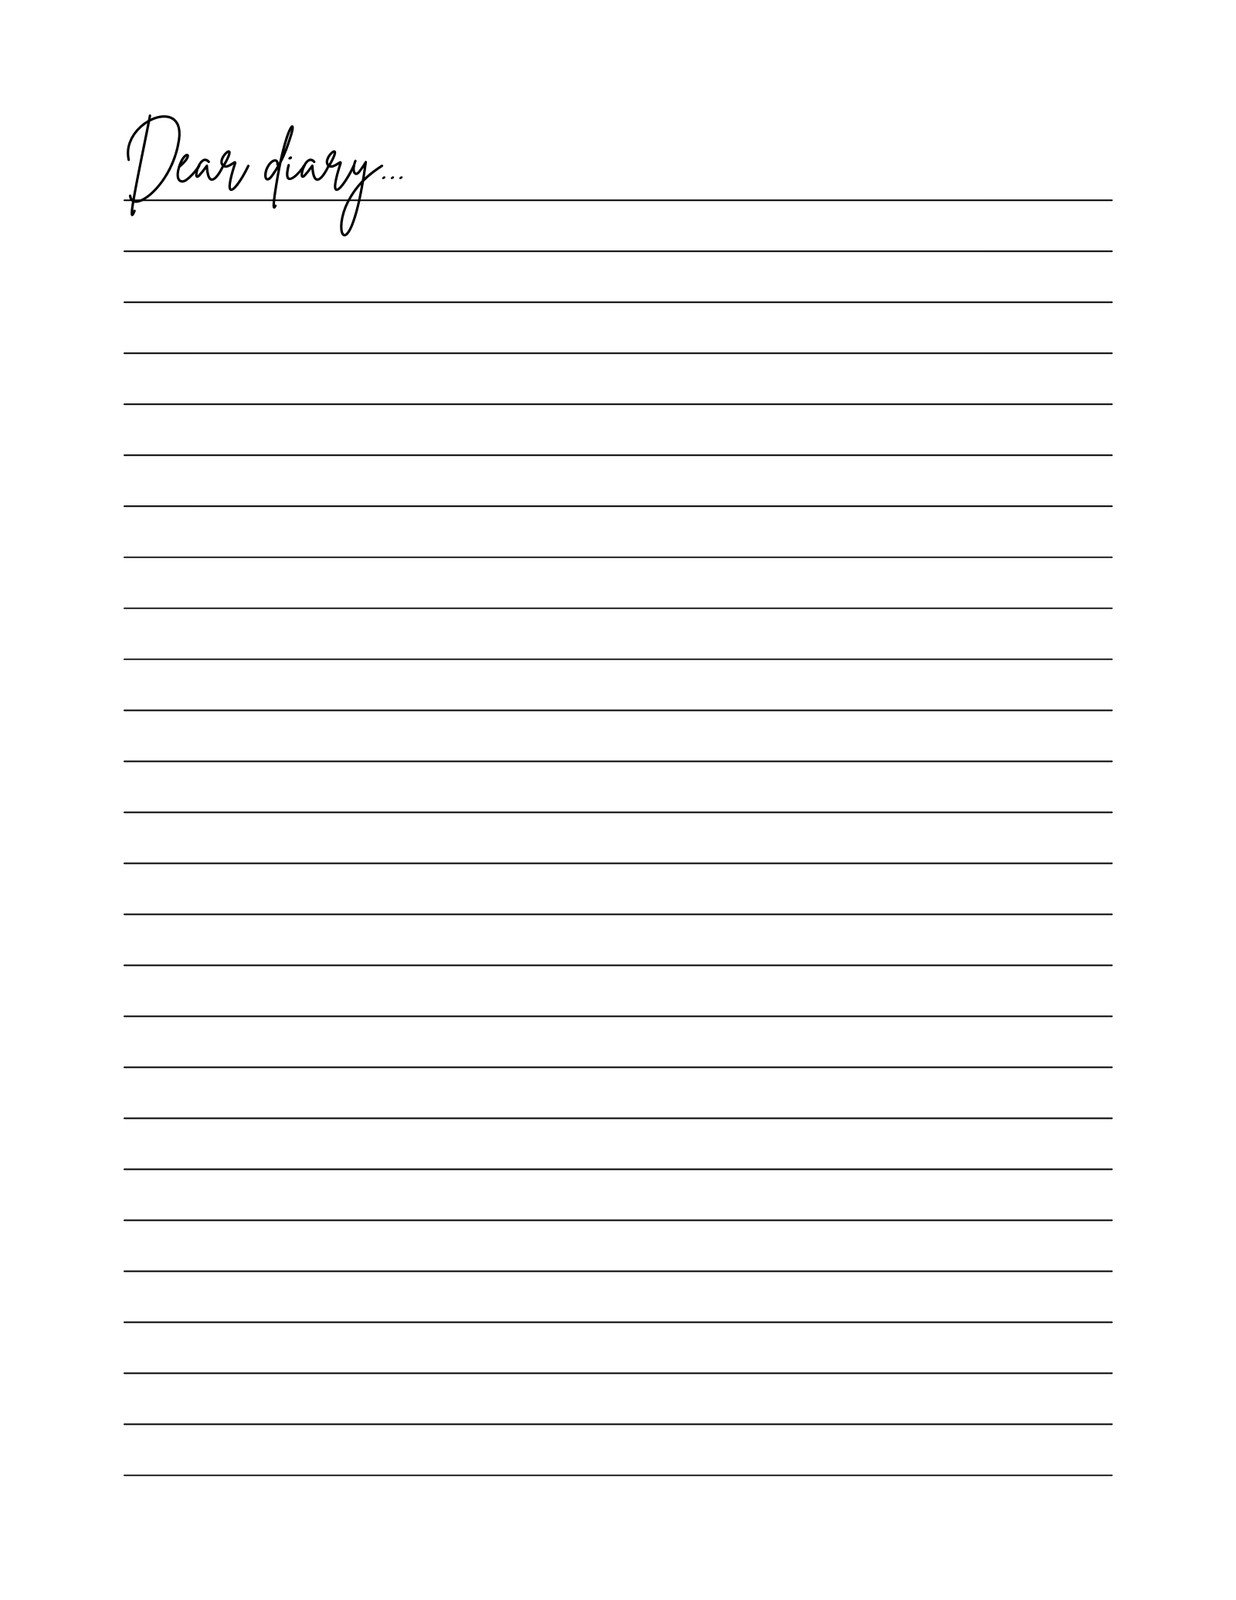 Diary Paper Template